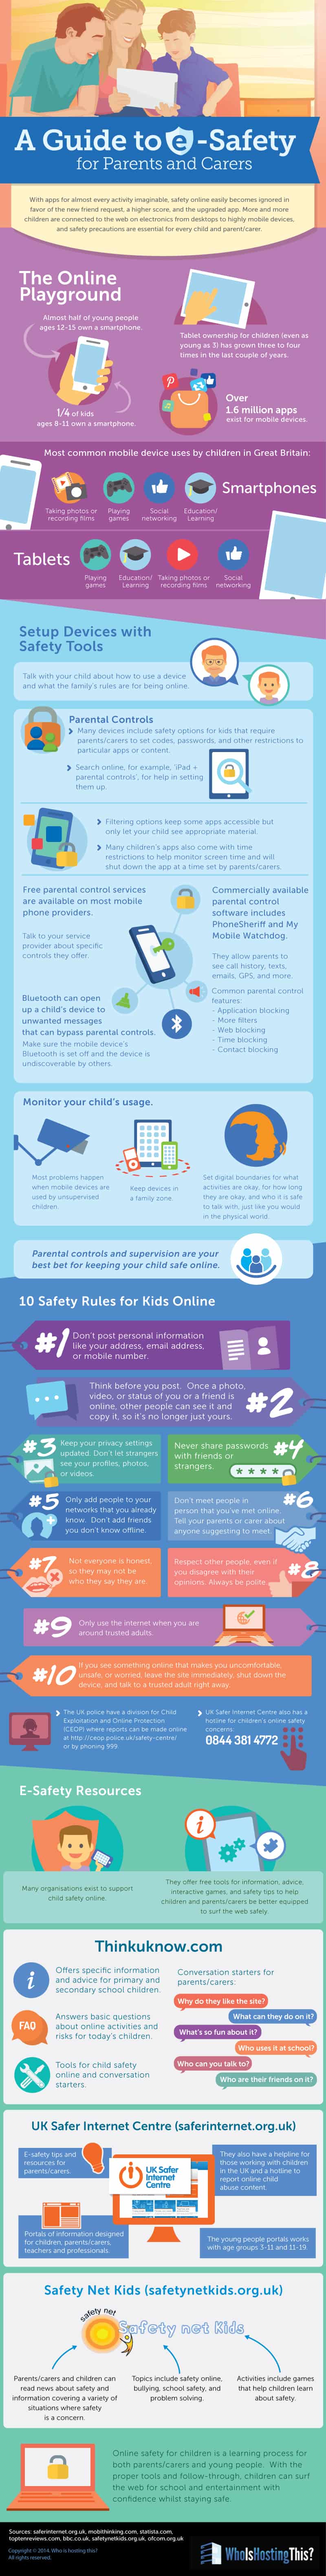 esafety-guide